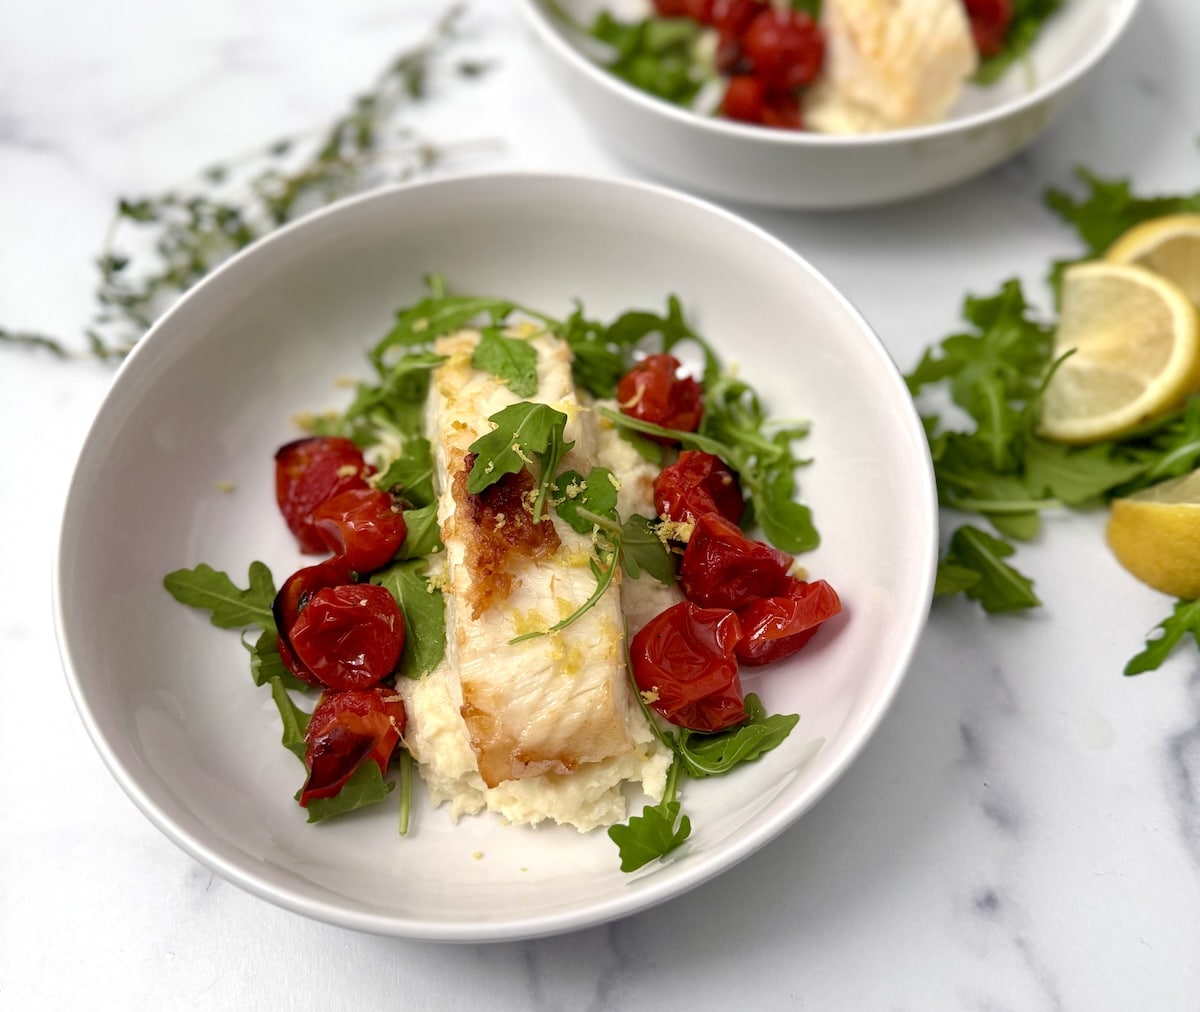 A bowl of pan-seared fish fillet on a bed of mashed parsnips, garnished with roasted cherry tomatoes, arugula, and lemon zest. Lemon wedges and extra greens are in the background.